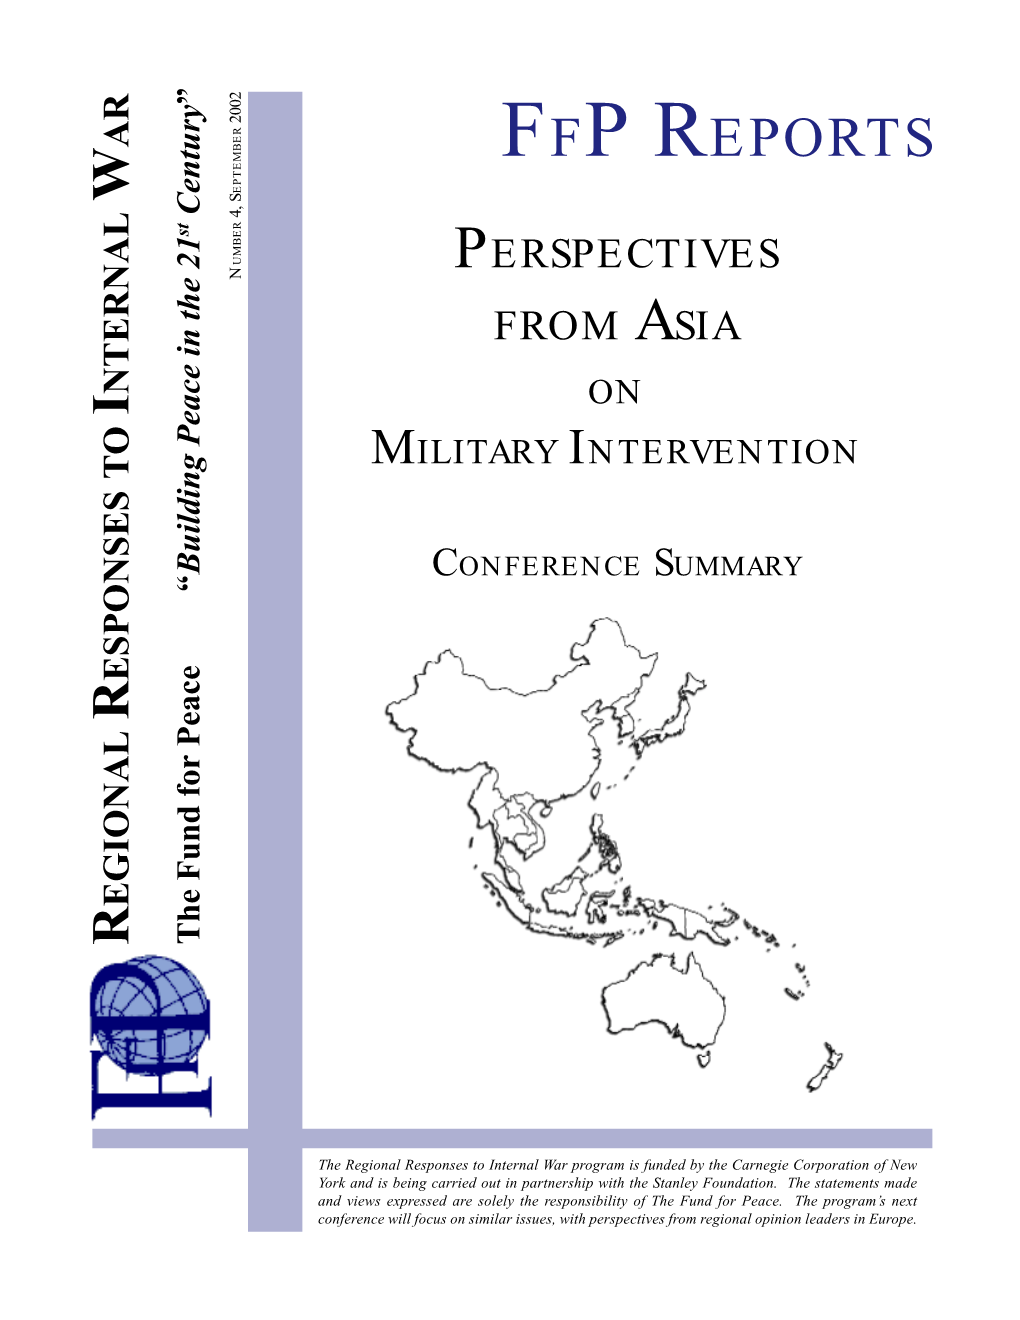 Perspectives from Asia on Military Intervention